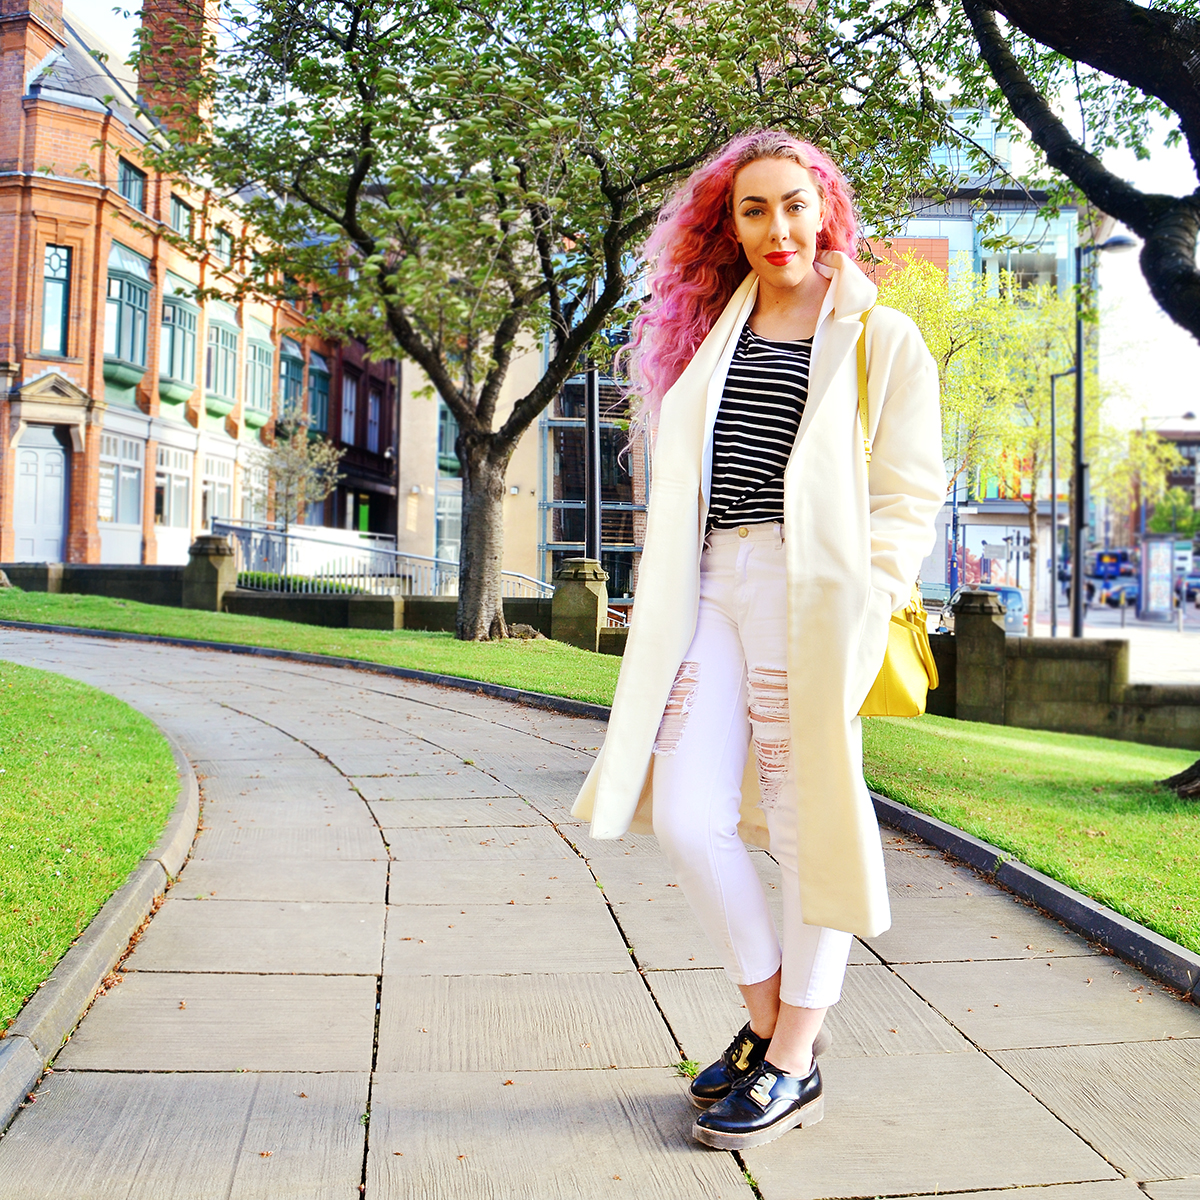 Dressing a long minimal cream coat, In The Style Blazer Jacket, Striped Topshop Top, Boohoo Ripped Jeans, River Island Shoes